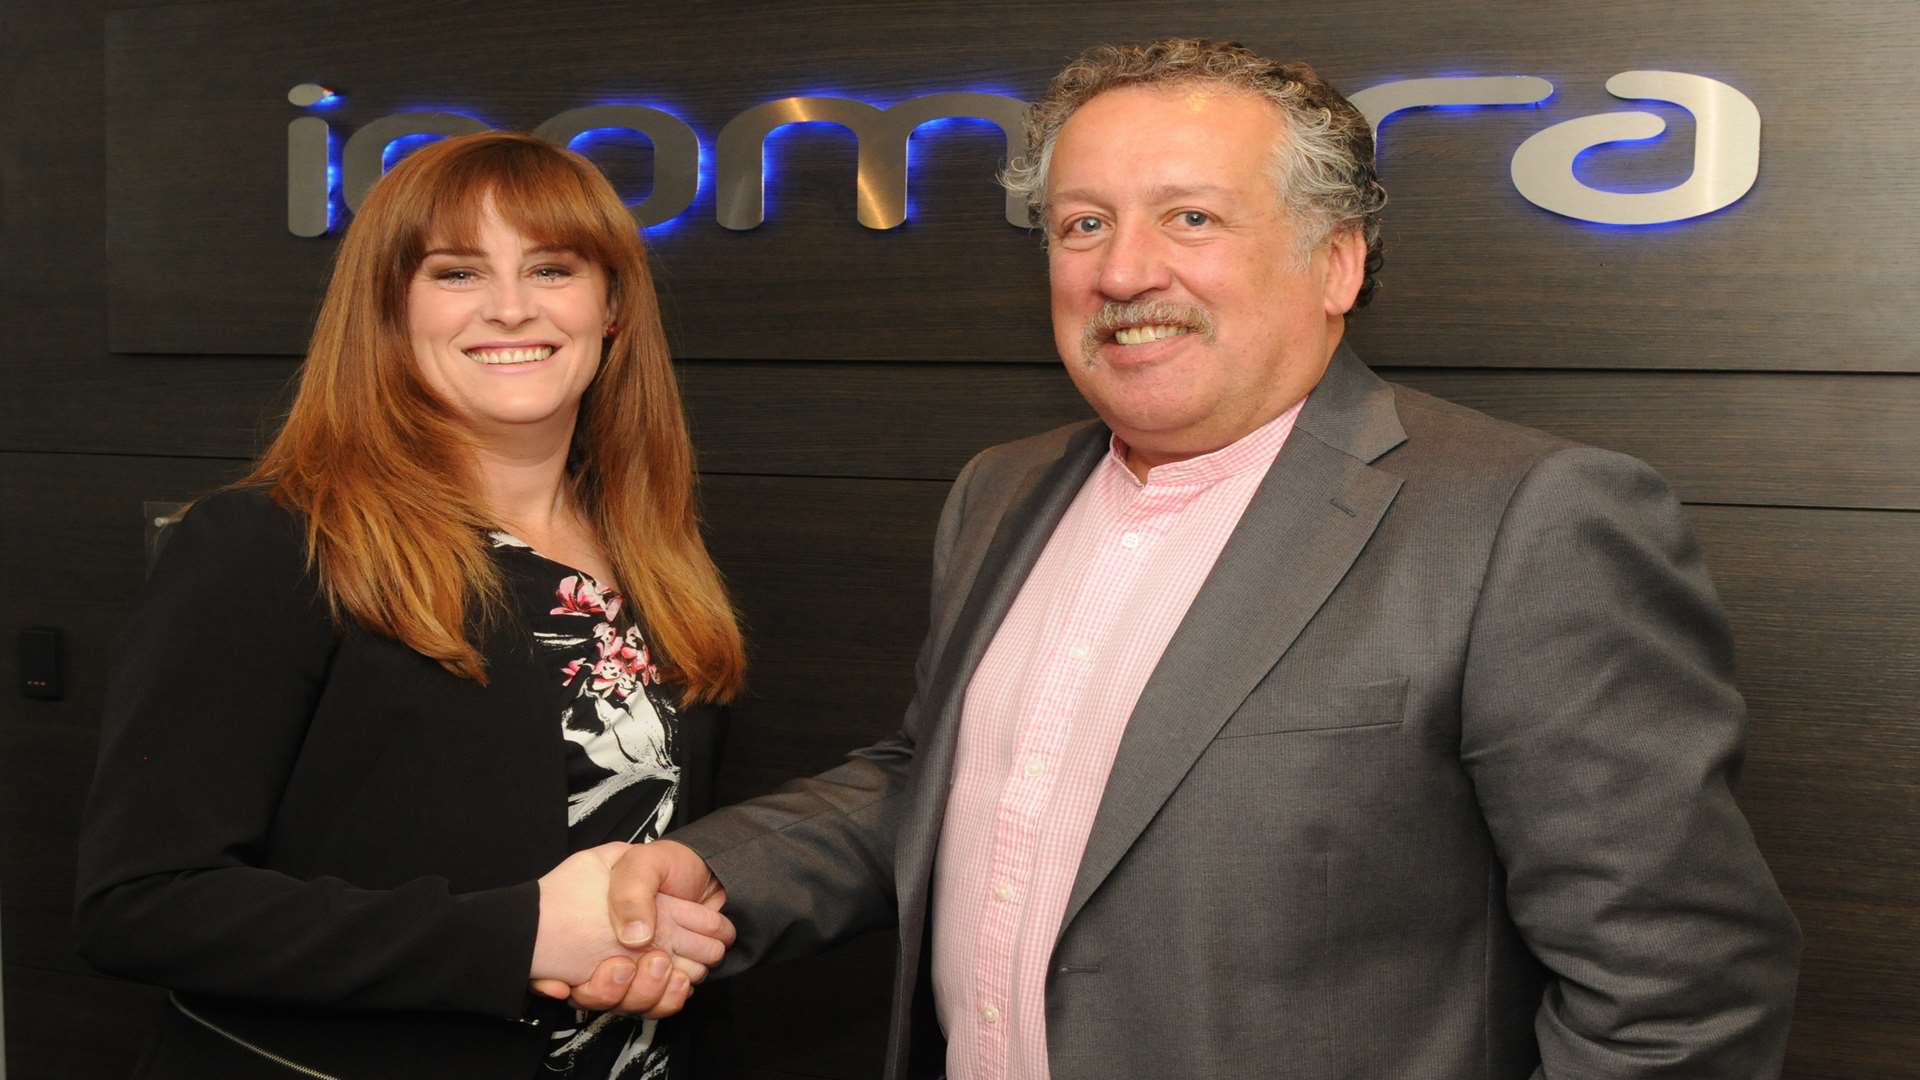 MP Kelly Tollhurst opens the new Icomera headquarters with UK managing director Dave Palmer